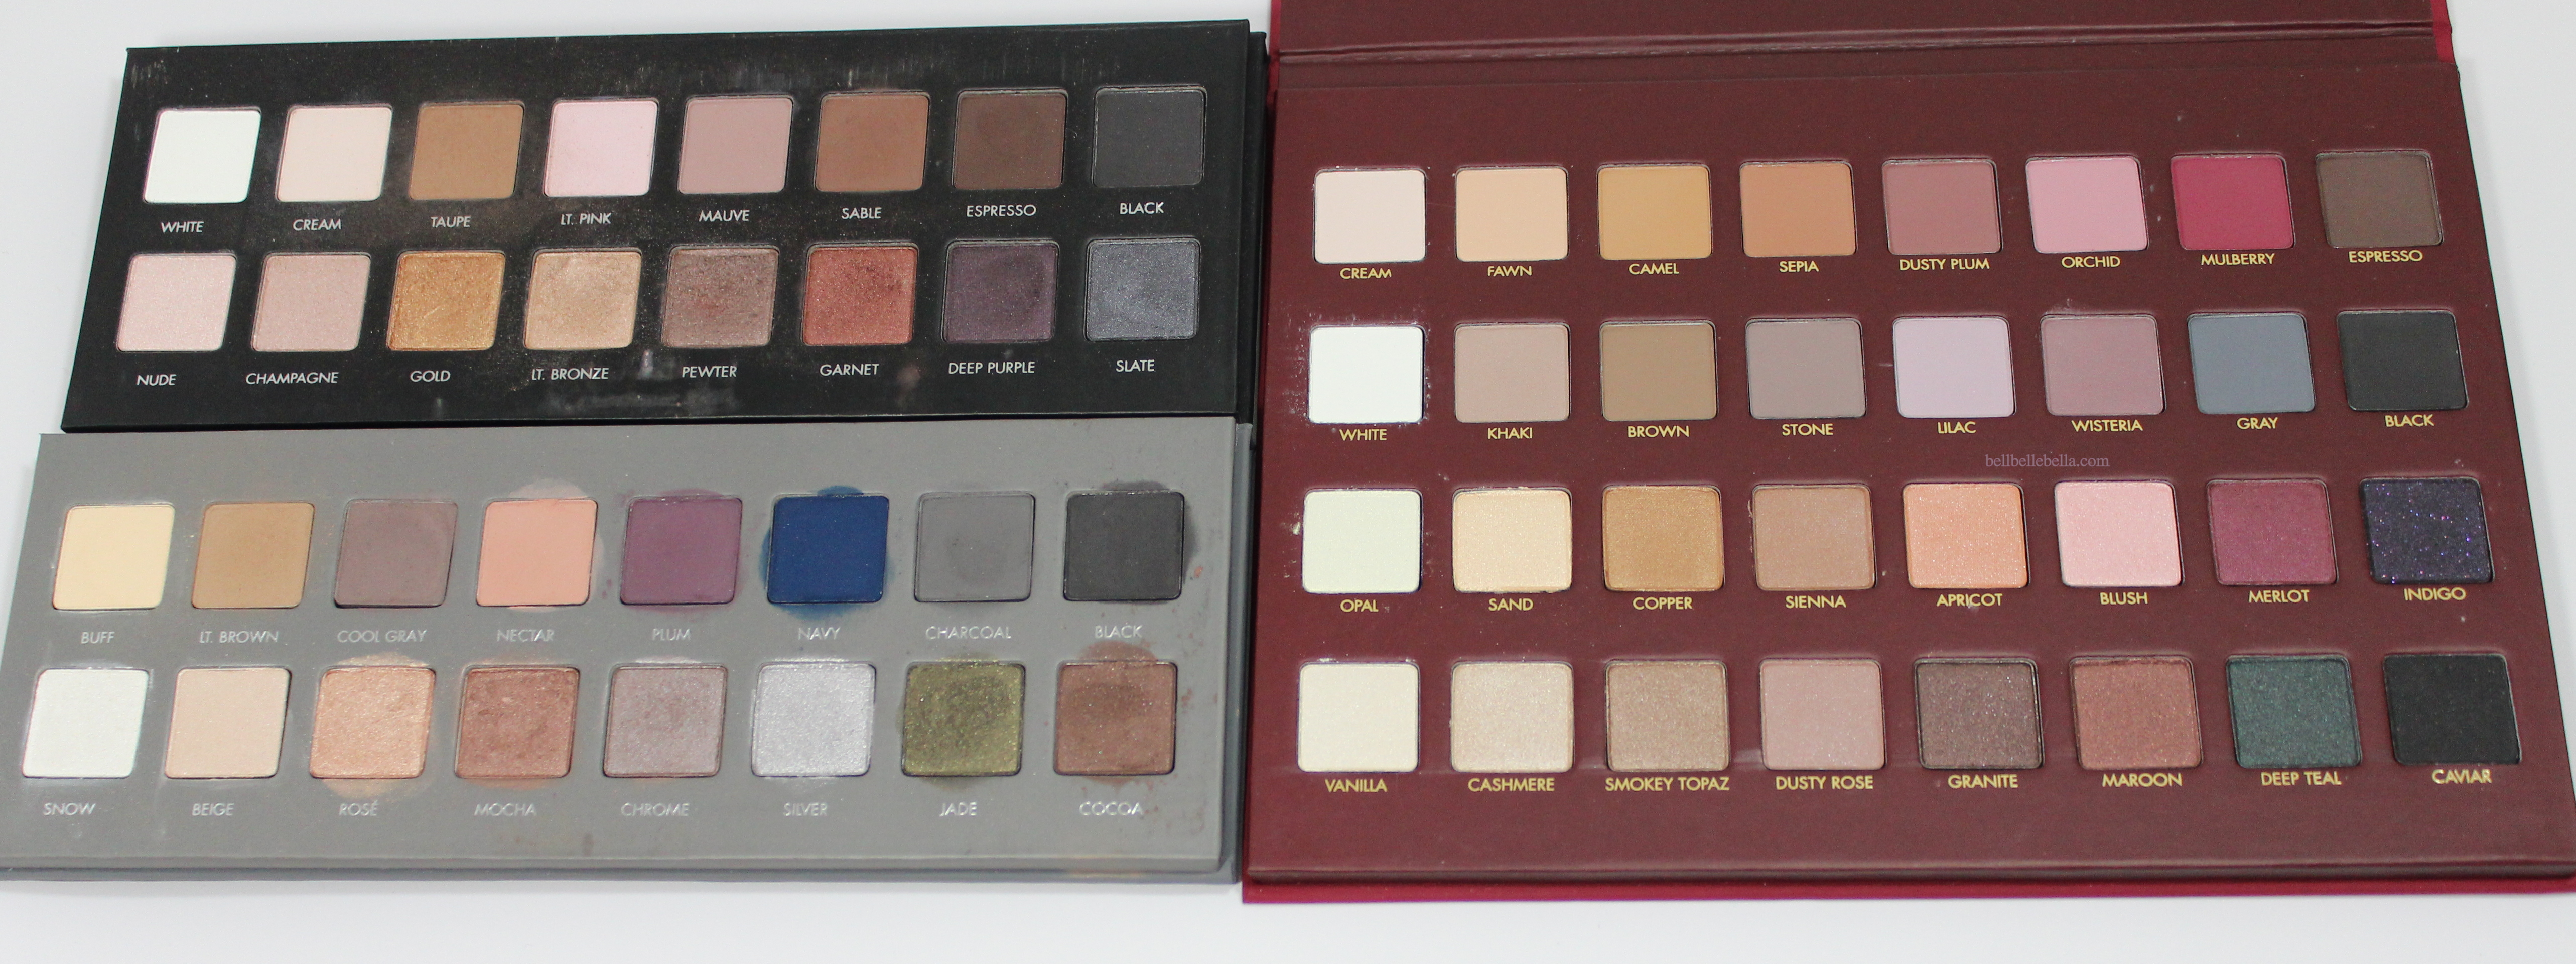 LORAC Mega PRO Palette Swatches and Review graphic